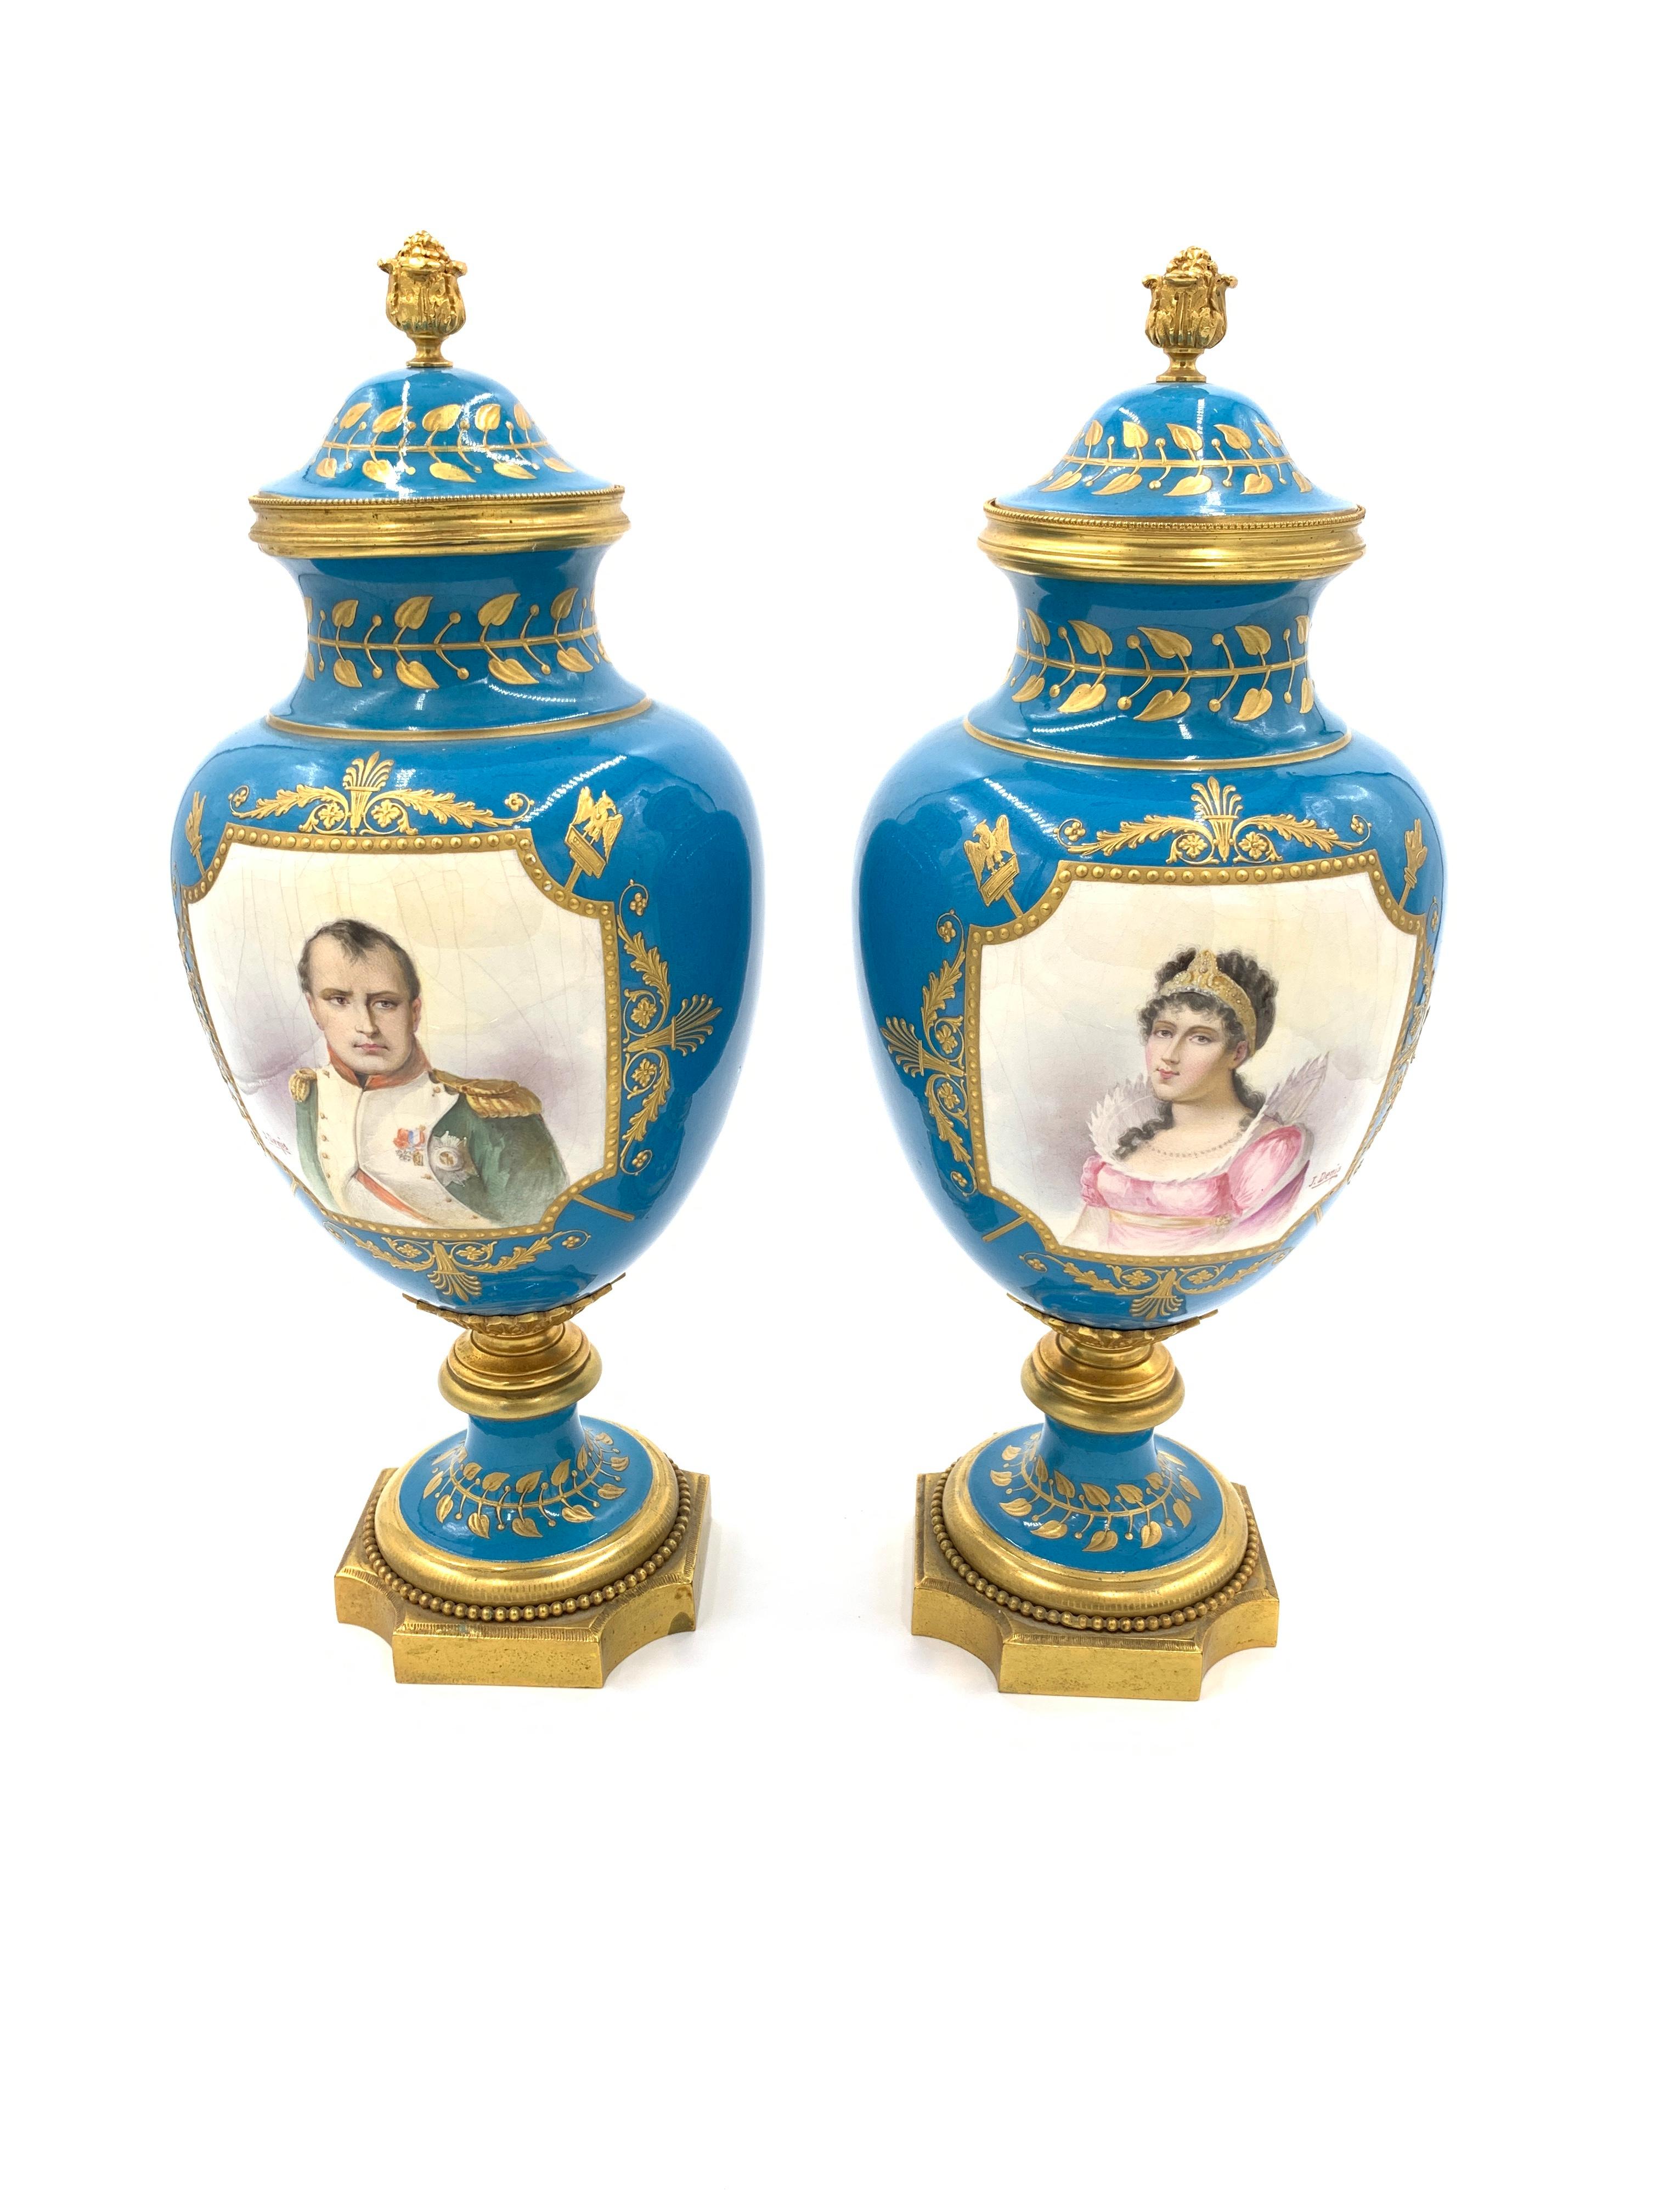 Beautiful pair of sky blue sevres style vases, front of the vases depicts Napoleon Bonaparte and his wife Joséphine Bonaparte (Empress Joséphine), both portraits are signed by the artist J.Denis, the back of the vases depicts two gold inlaid eagles